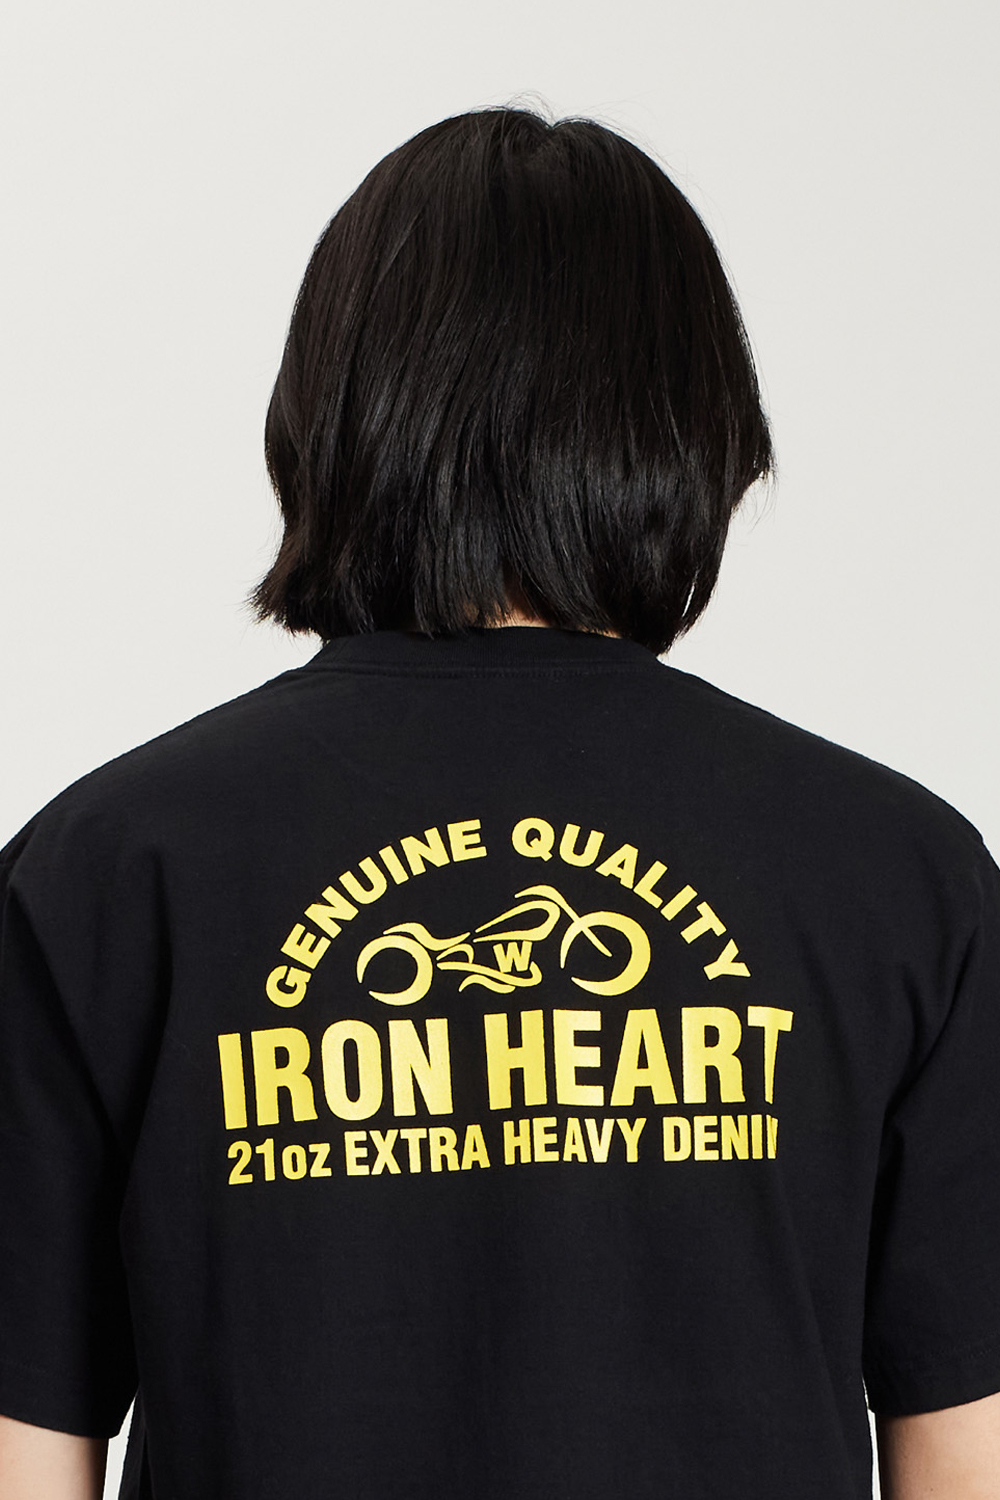 New Arrival : Iron Heart